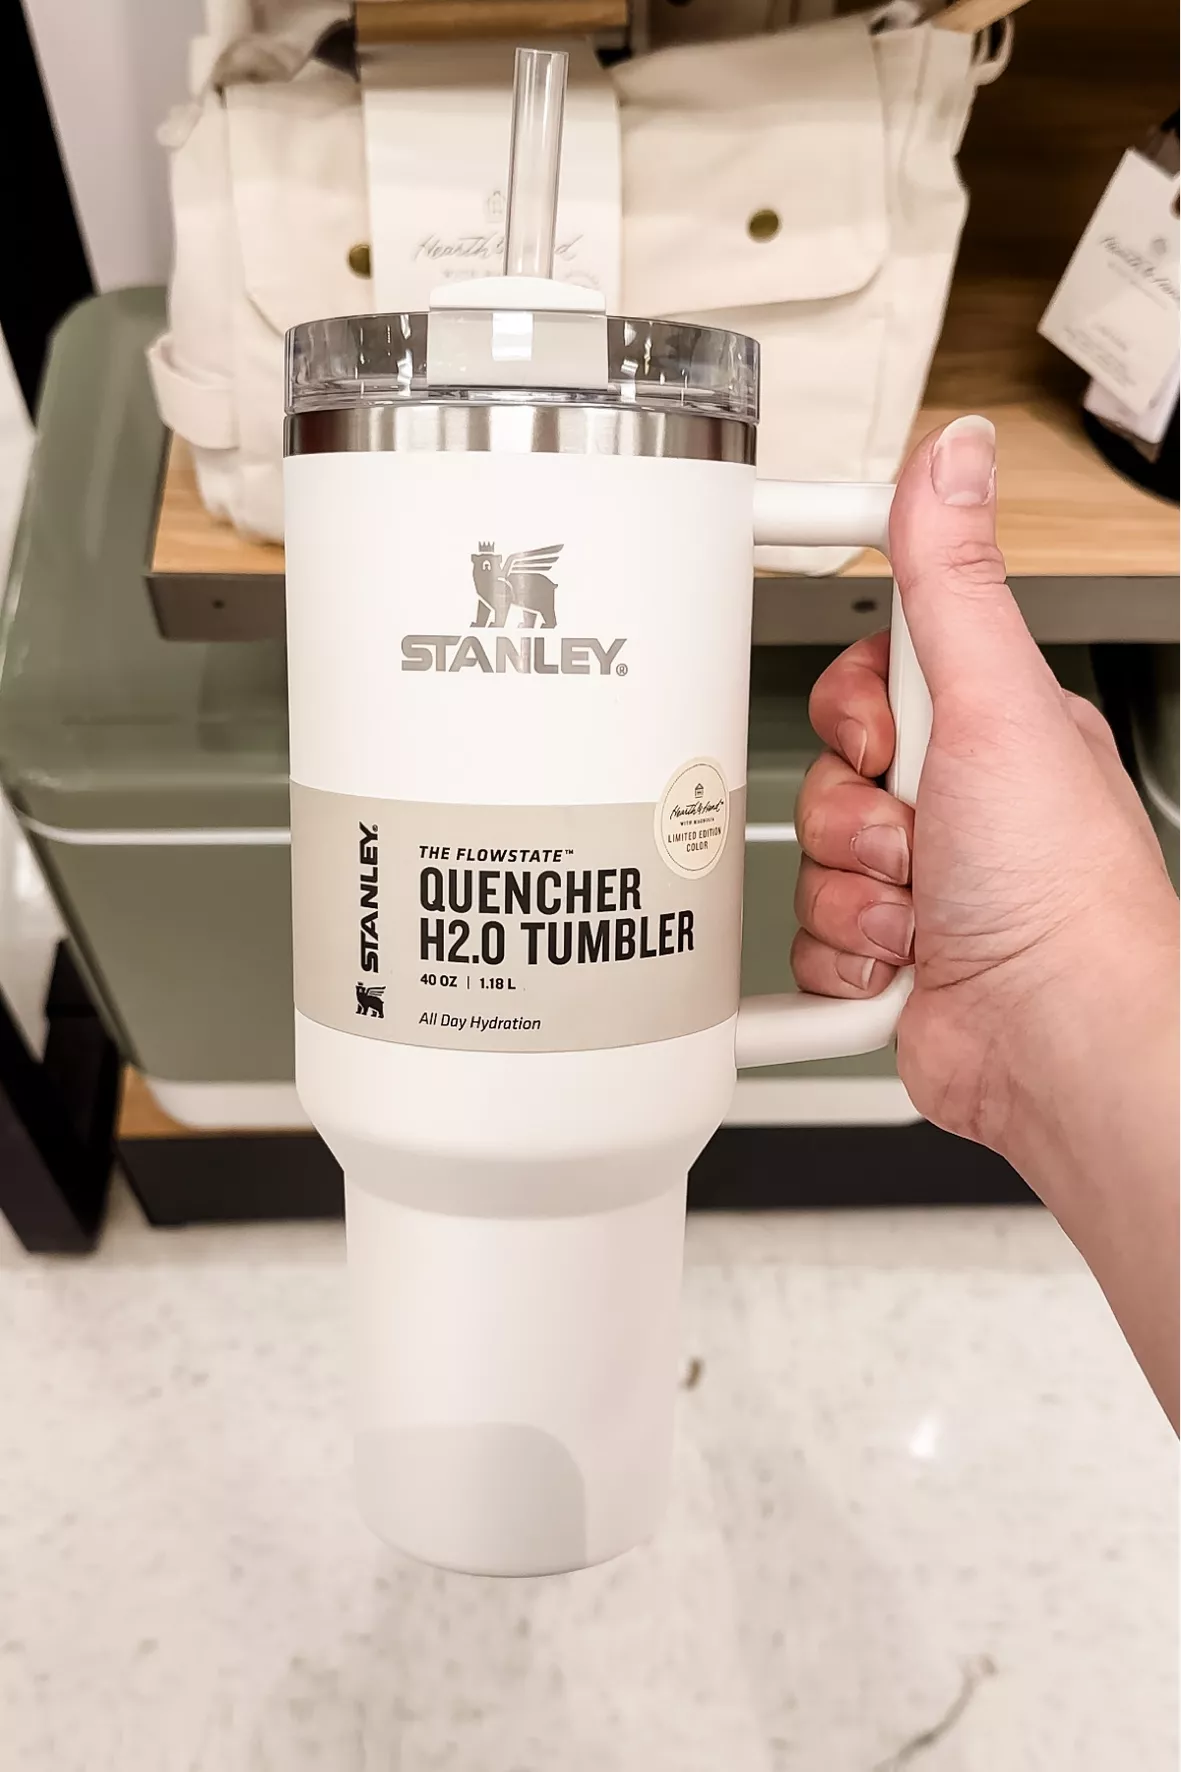 NEW* STANLEY CUP ALERT!!! Hearth & Hand Limited Edition stanley